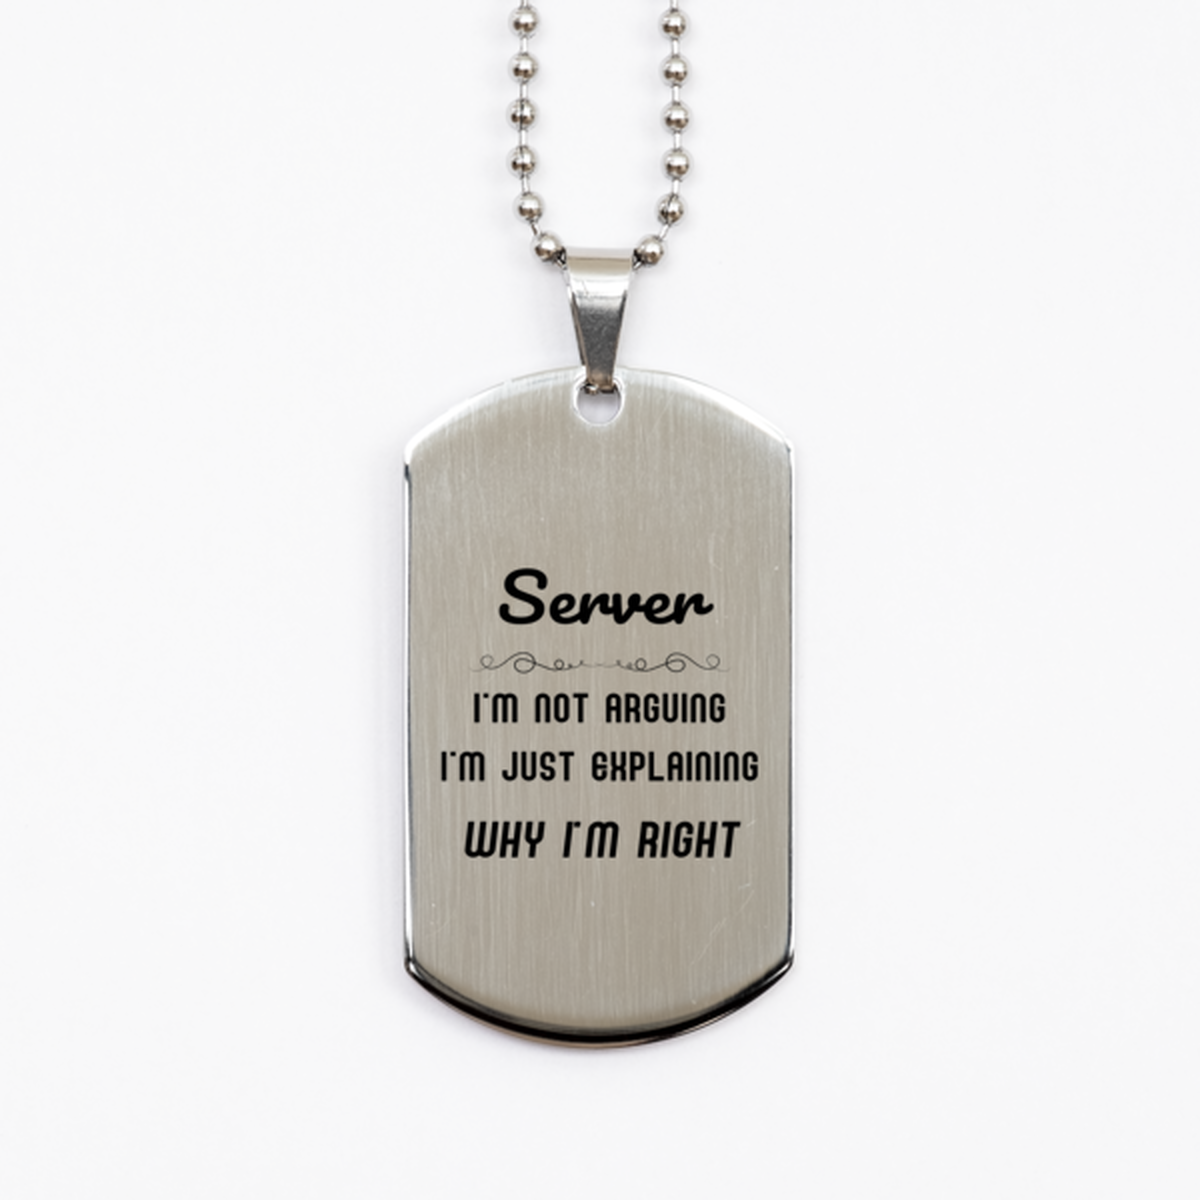 Server I'm not Arguing. I'm Just Explaining Why I'm RIGHT Silver Dog Tag, Funny Saying Quote Server Gifts For Server Graduation Birthday Christmas Gifts for Men Women Coworker